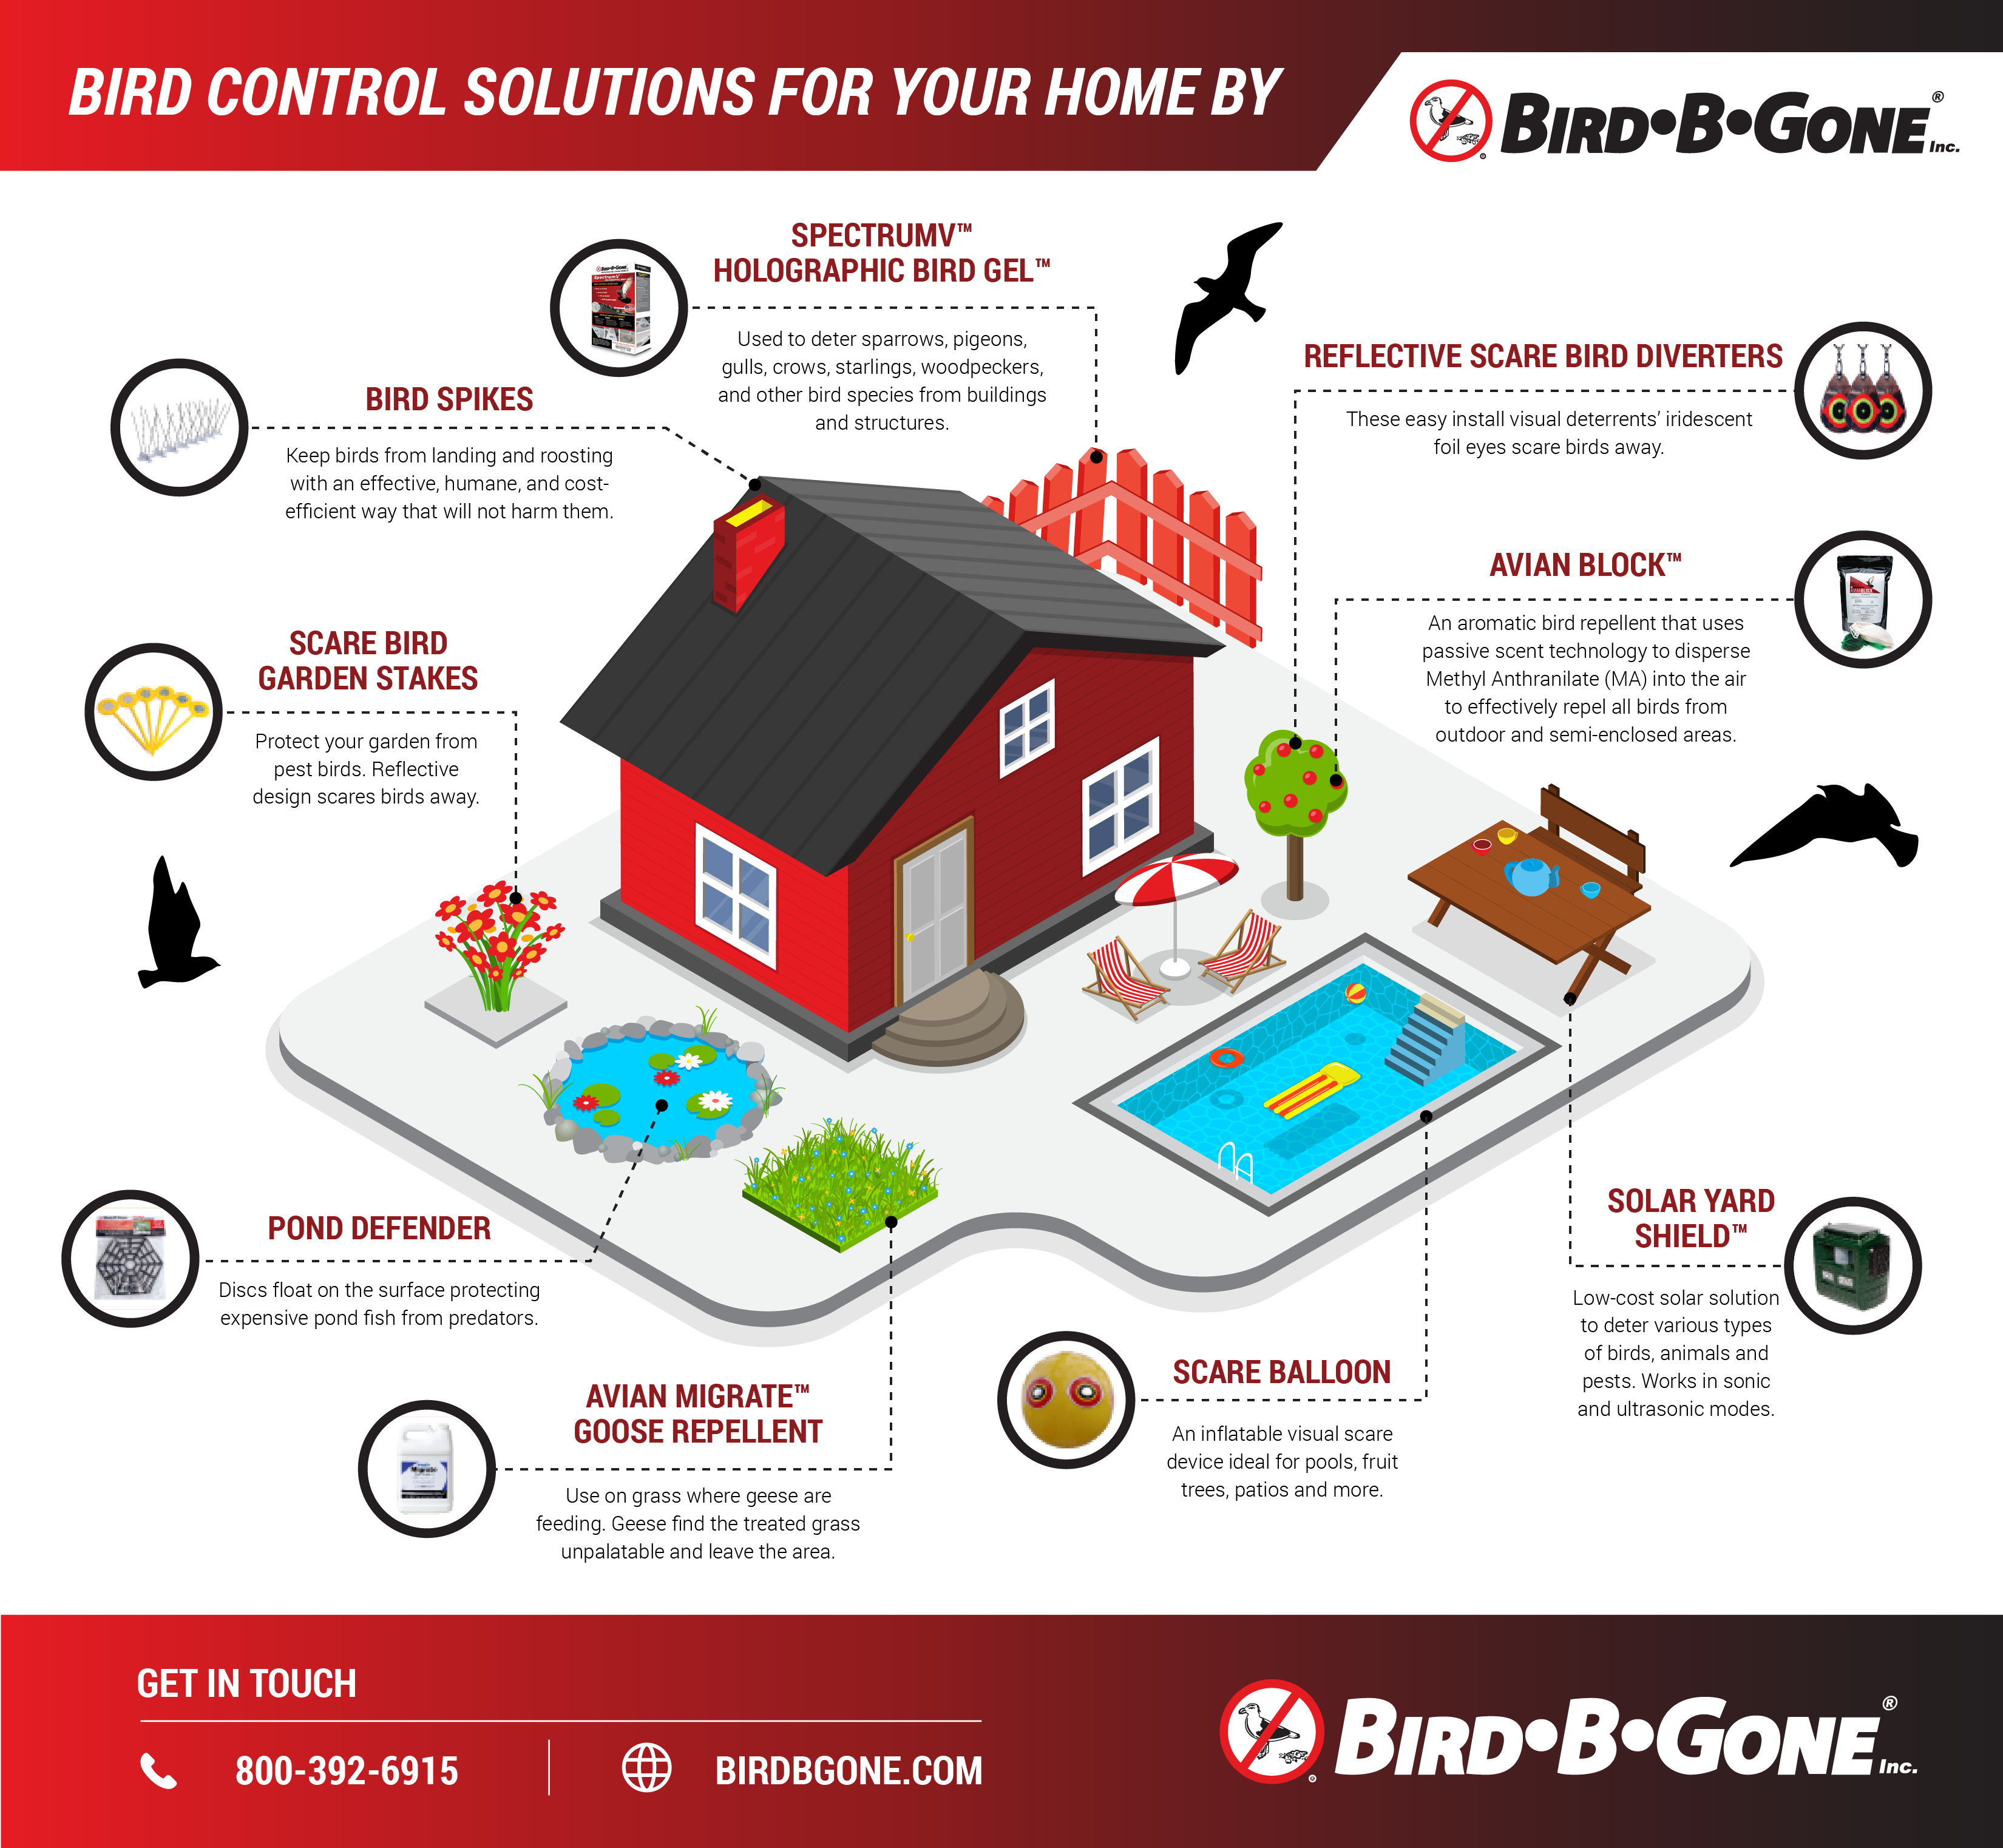 Nesting Birds On Your Home How To Get Rid Of Them Bird B Gone Inc